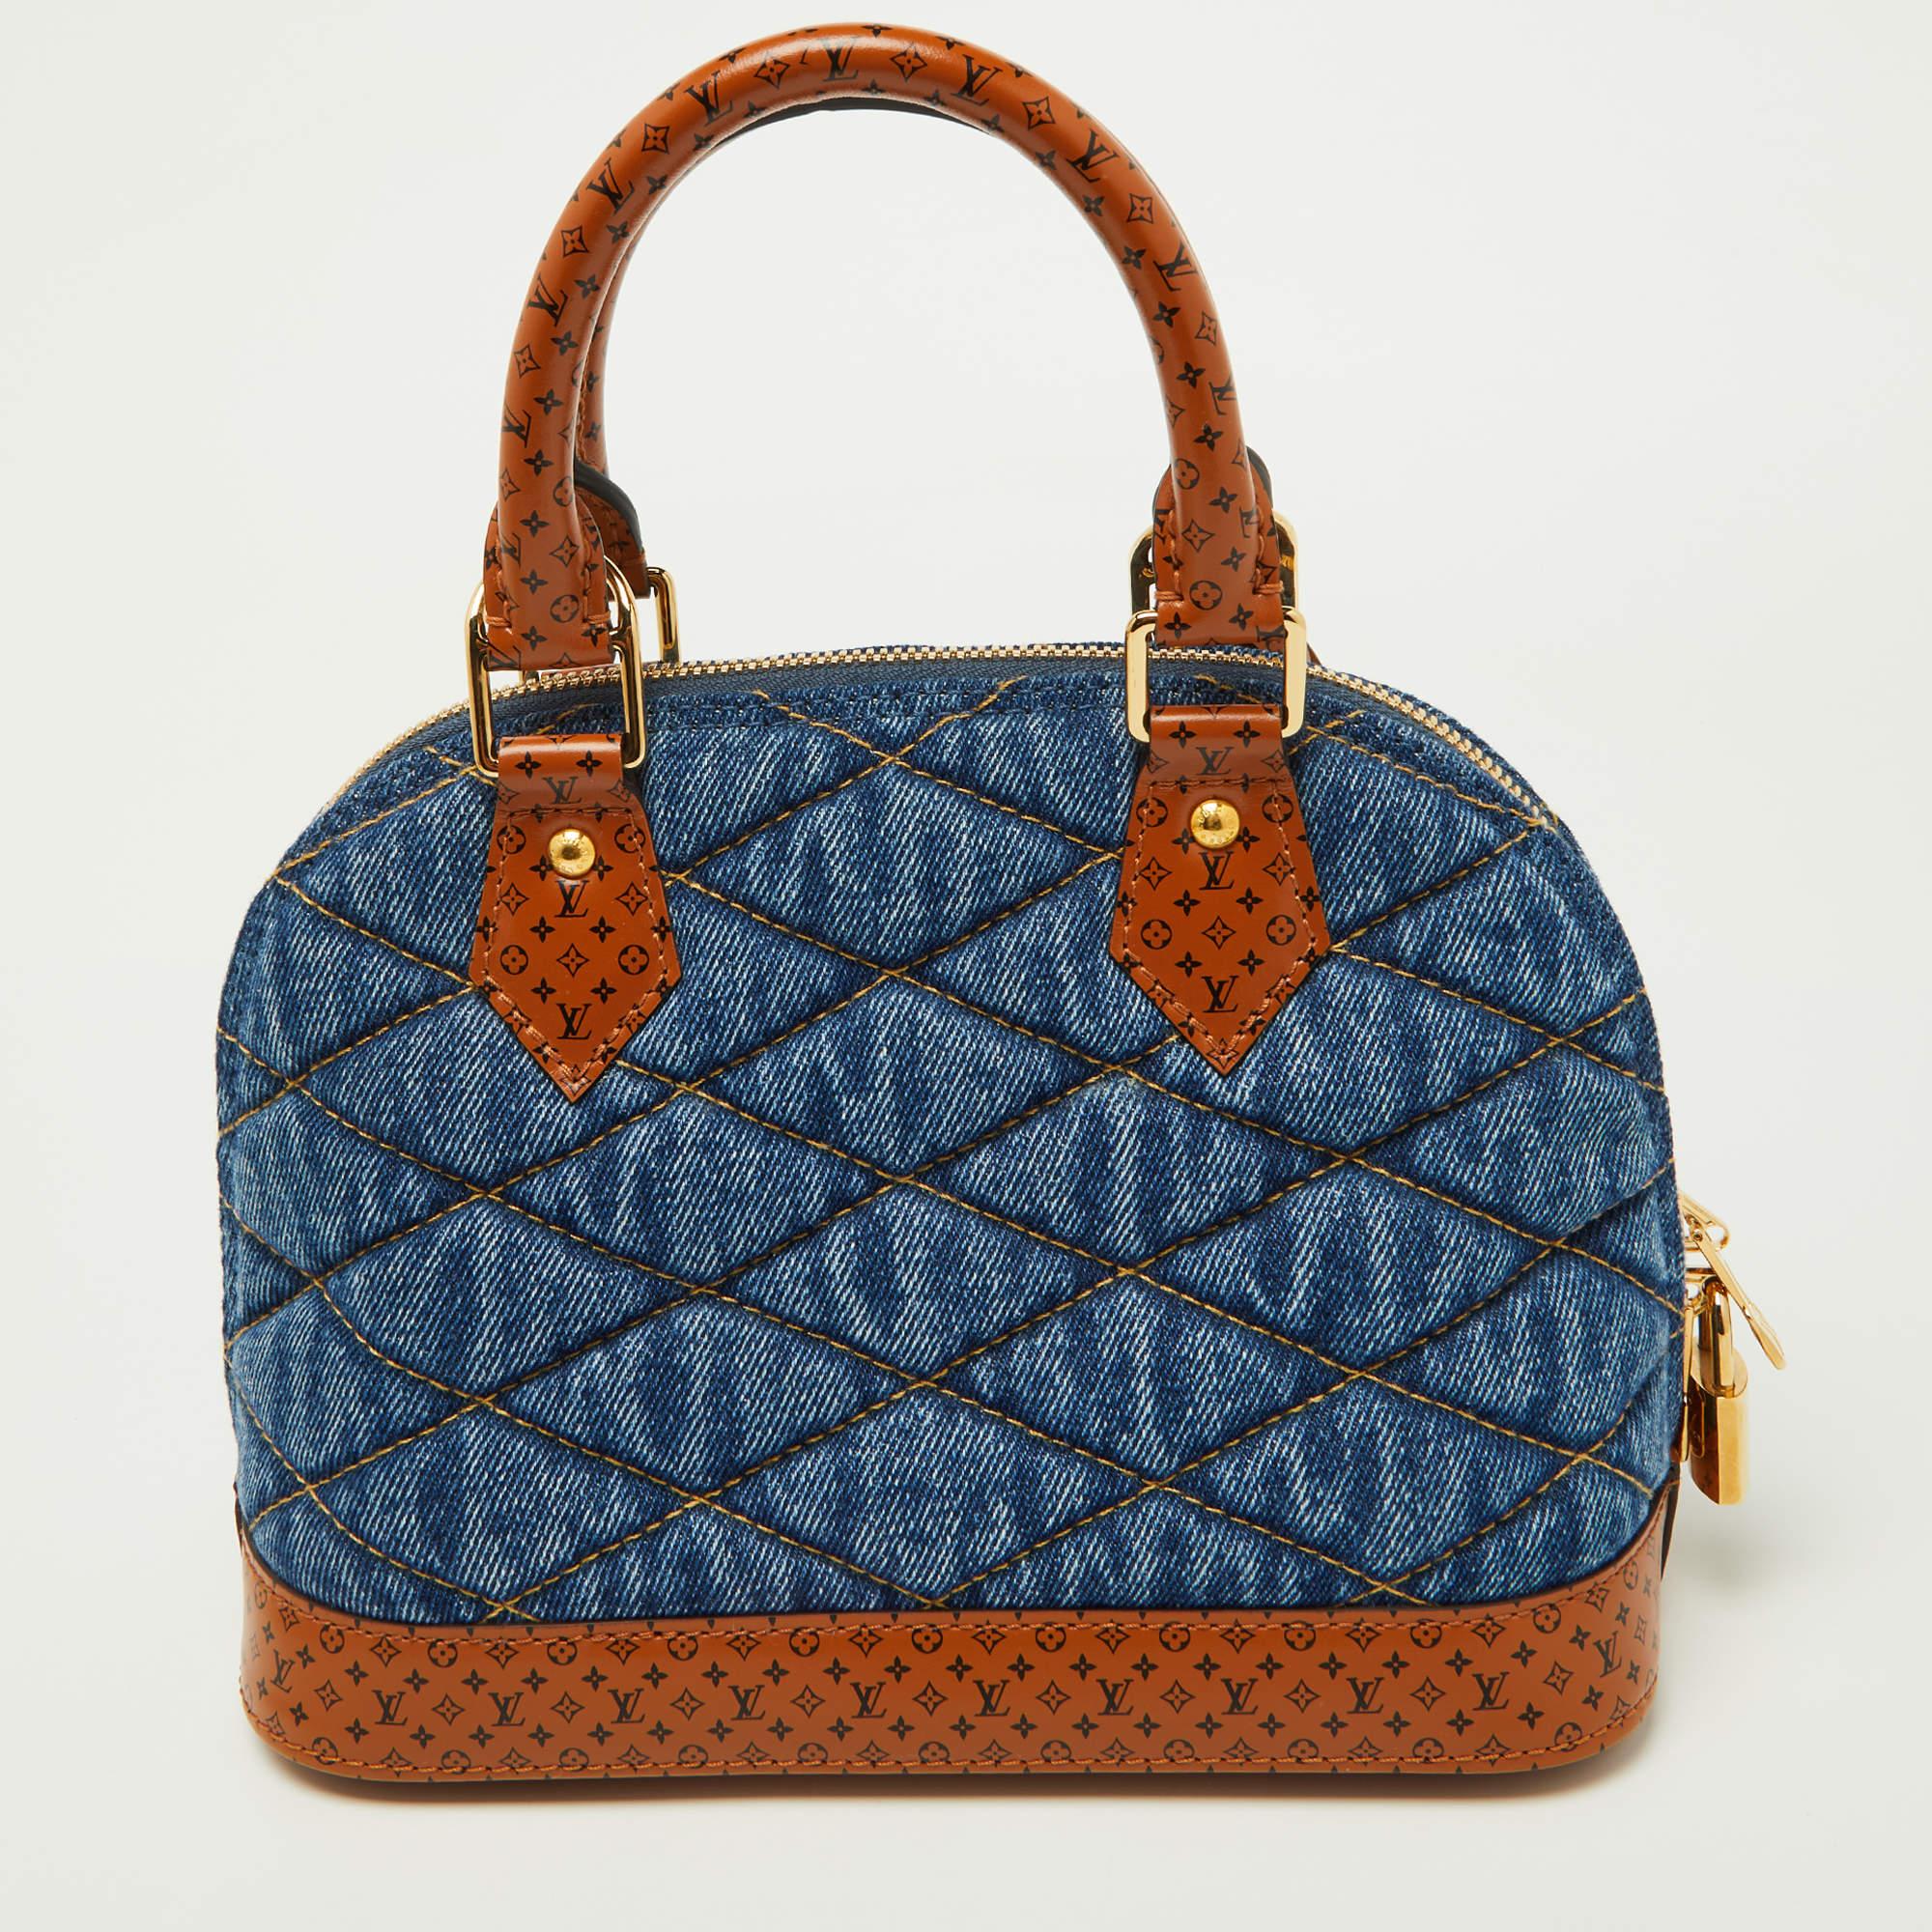 Out of all the irresistible handbags from Louis Vuitton, the Alma is the most structured one. First introduced in 1934 by Gaston-Louis Vuitton, the Alma is a classic that has received love from fashion icons. This piece comes crafted from blue denim